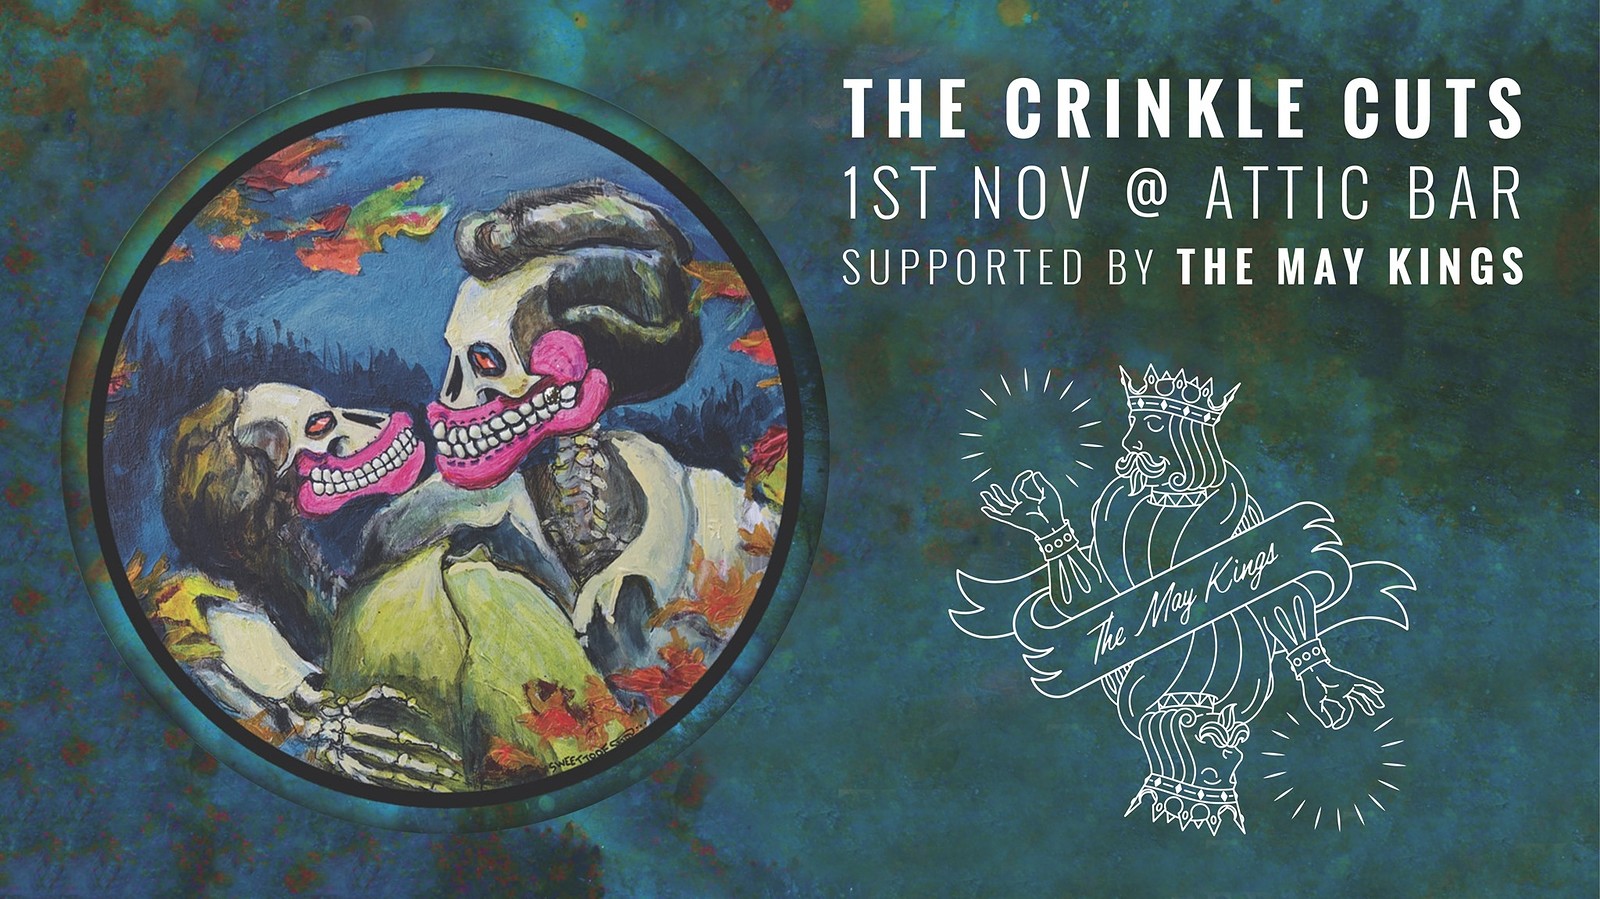 Crinkle Cuts / The May Kings at The Attic Bar